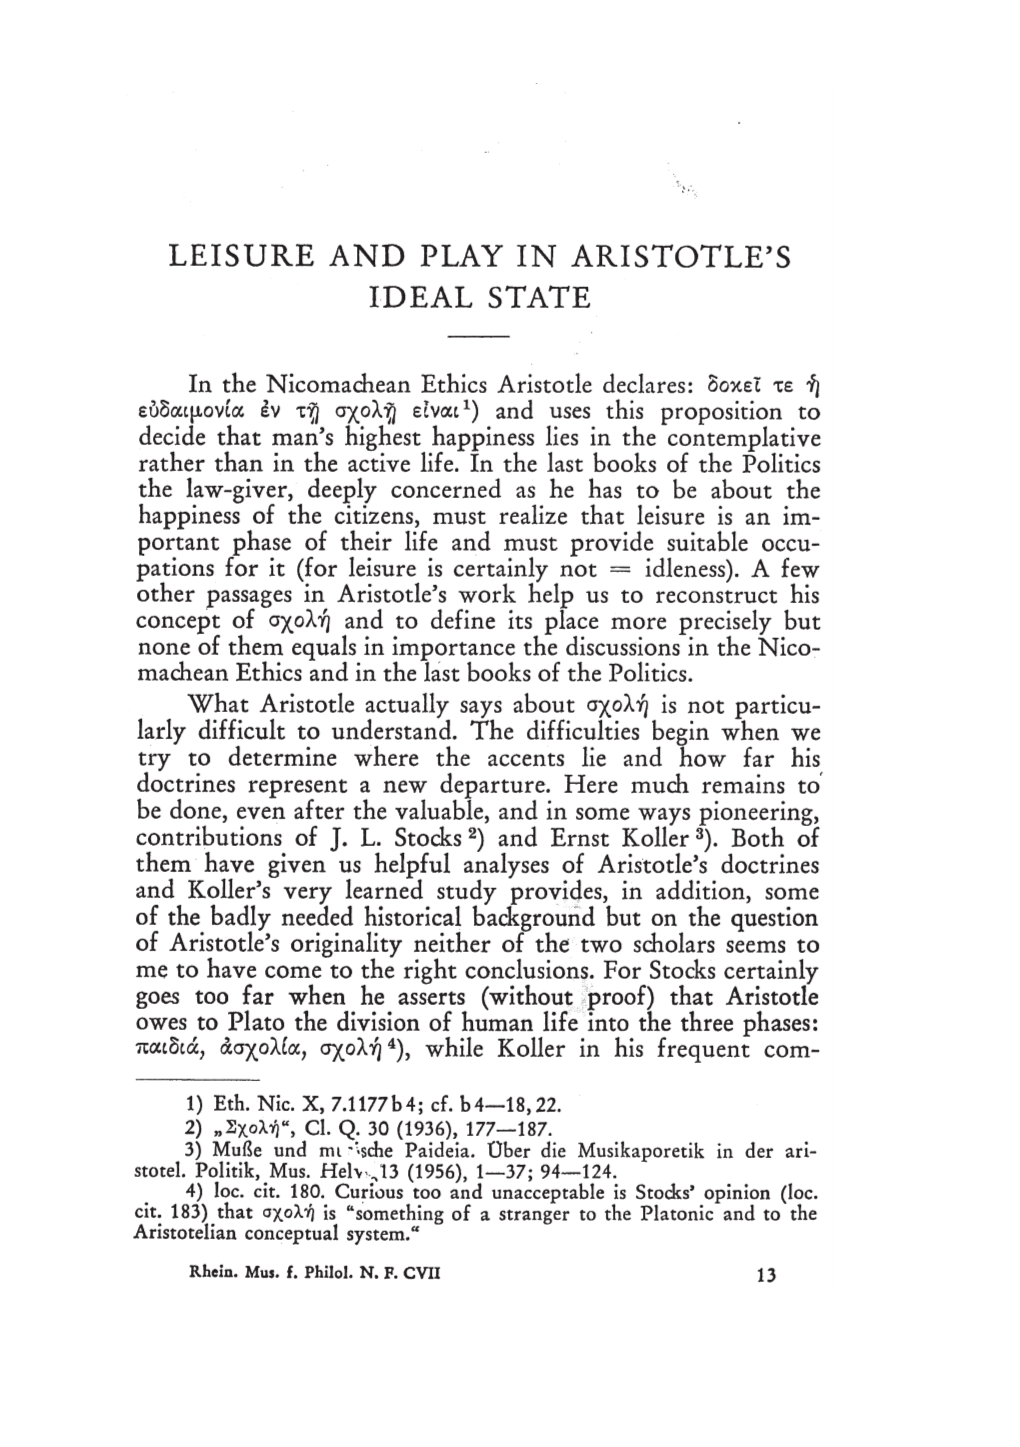 Leisure and Play in Aristotle's Ideal State